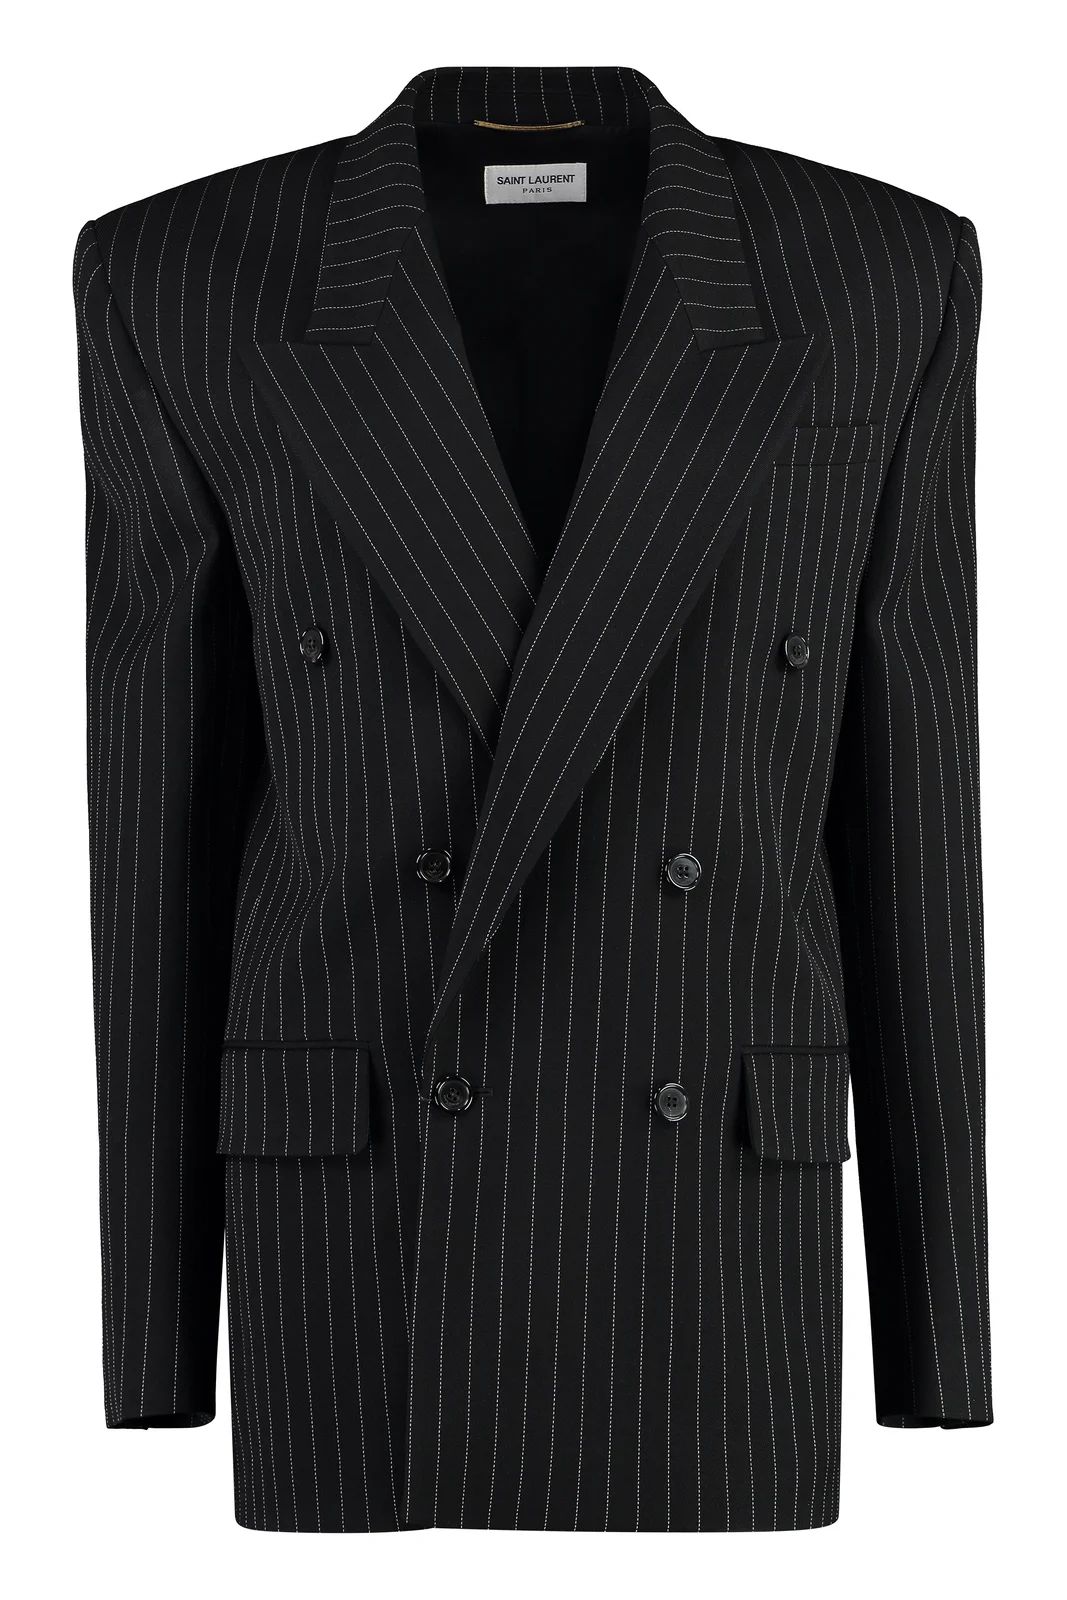 Saint Laurent Double-Breasted Striped Blazer | Cettire Global